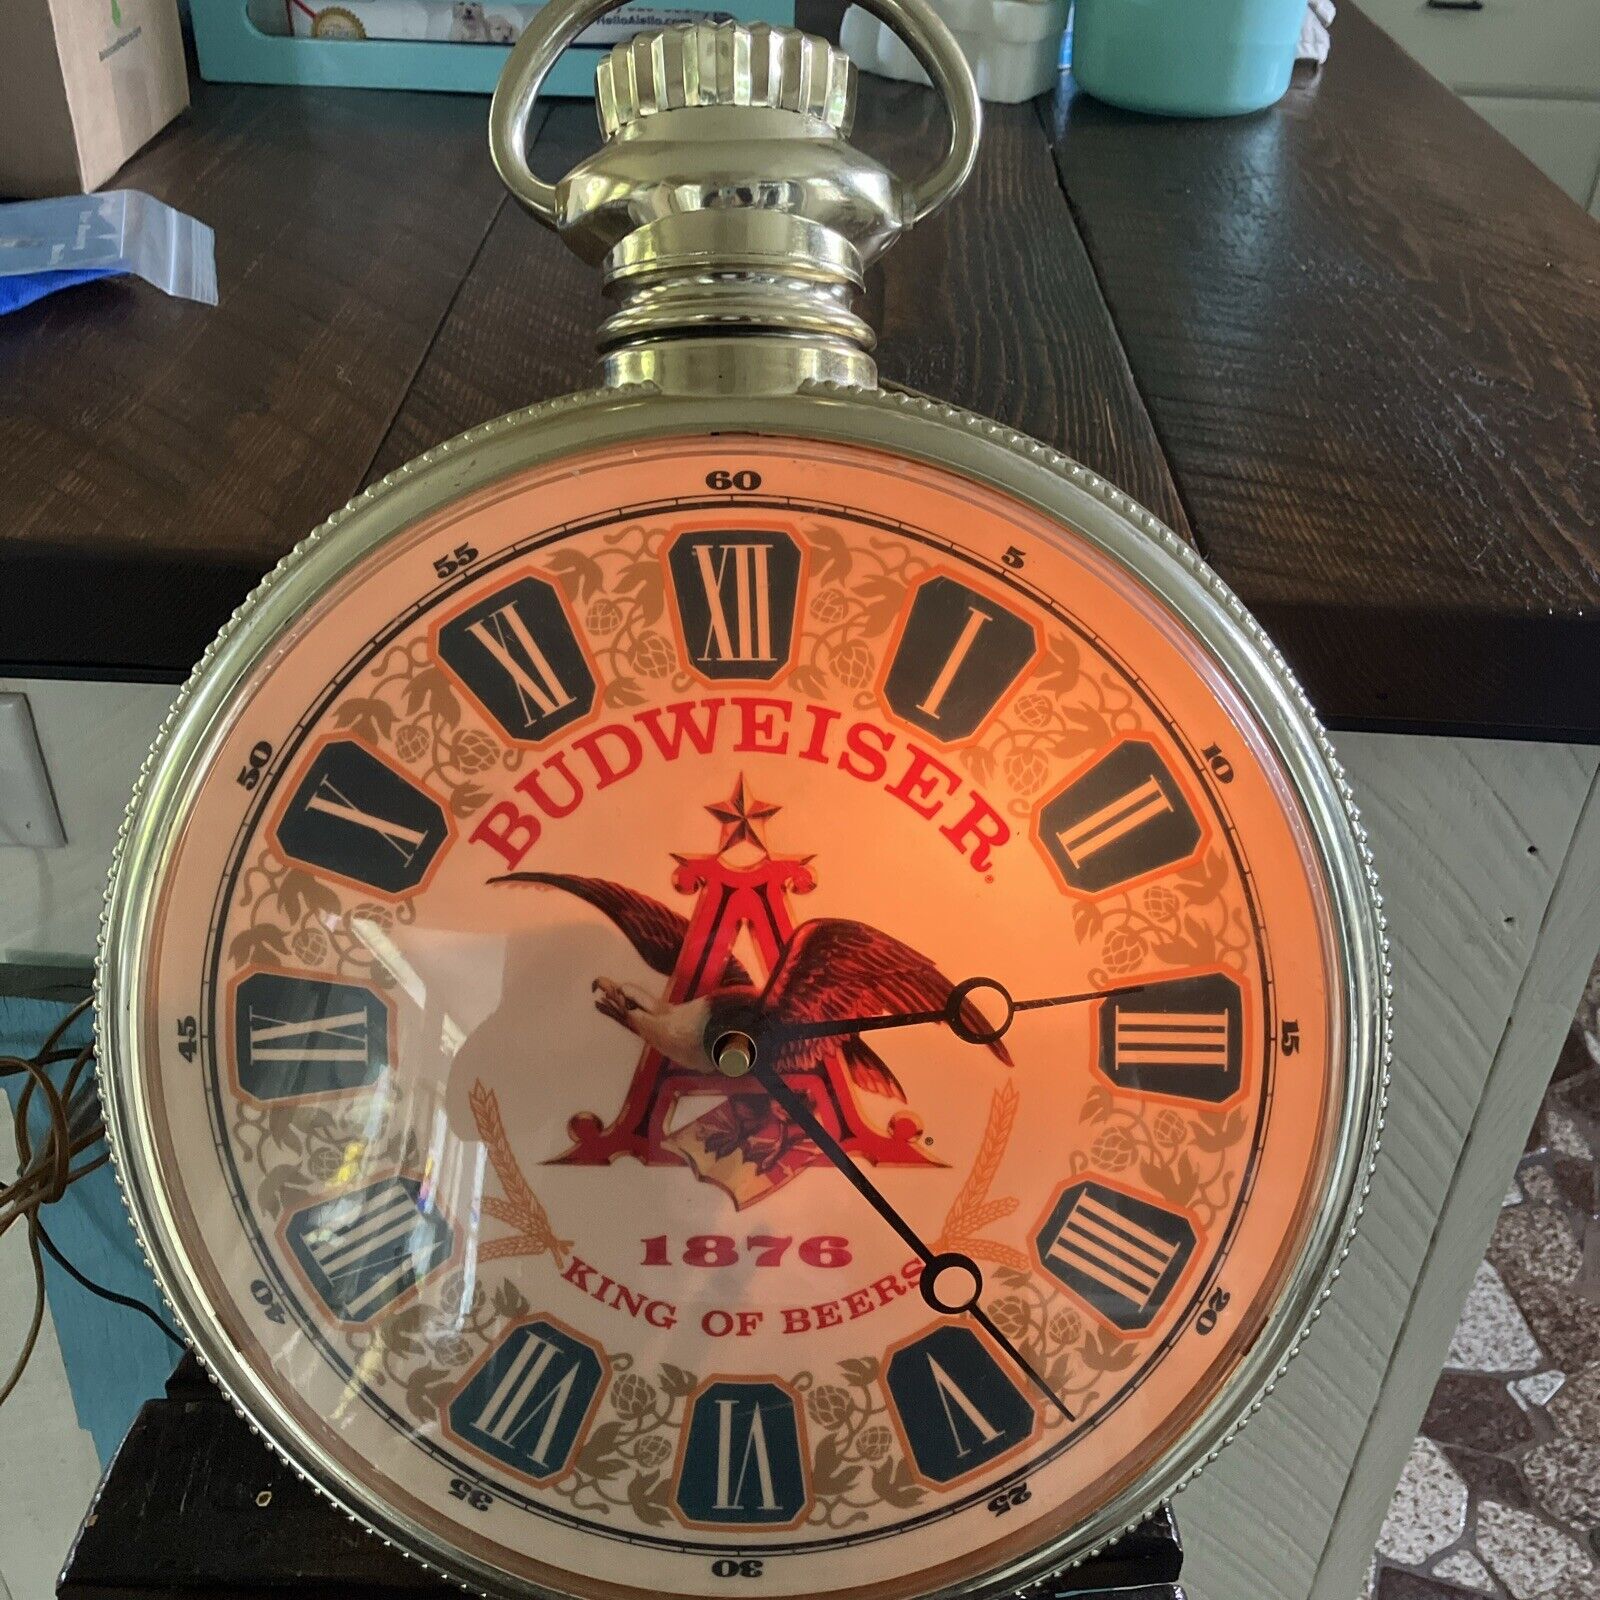 Budweiser 1876 king of beers Pocket watch Clock LIGHTS UP CLOCK WORKS 20” Tall